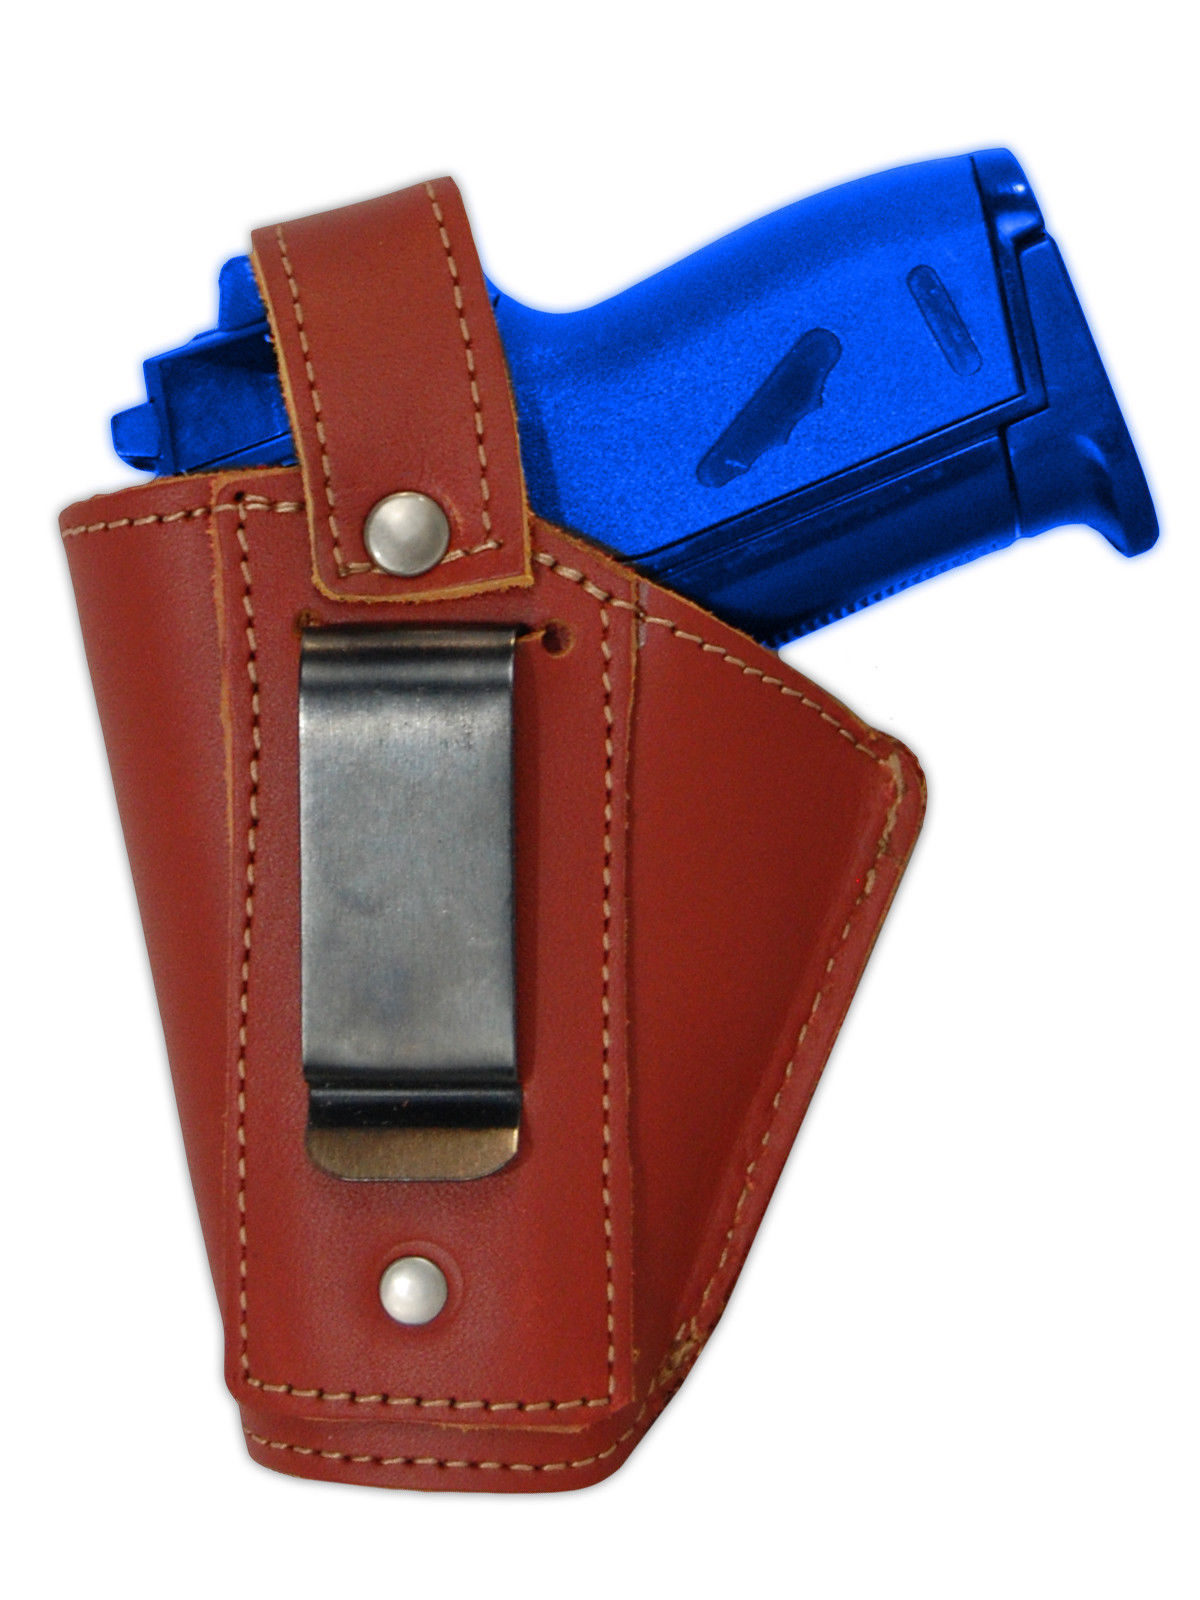 Barsony Gun OWB Brown Leather Belt Clip Holster for Astra AMT CZ Mini 22 25 380